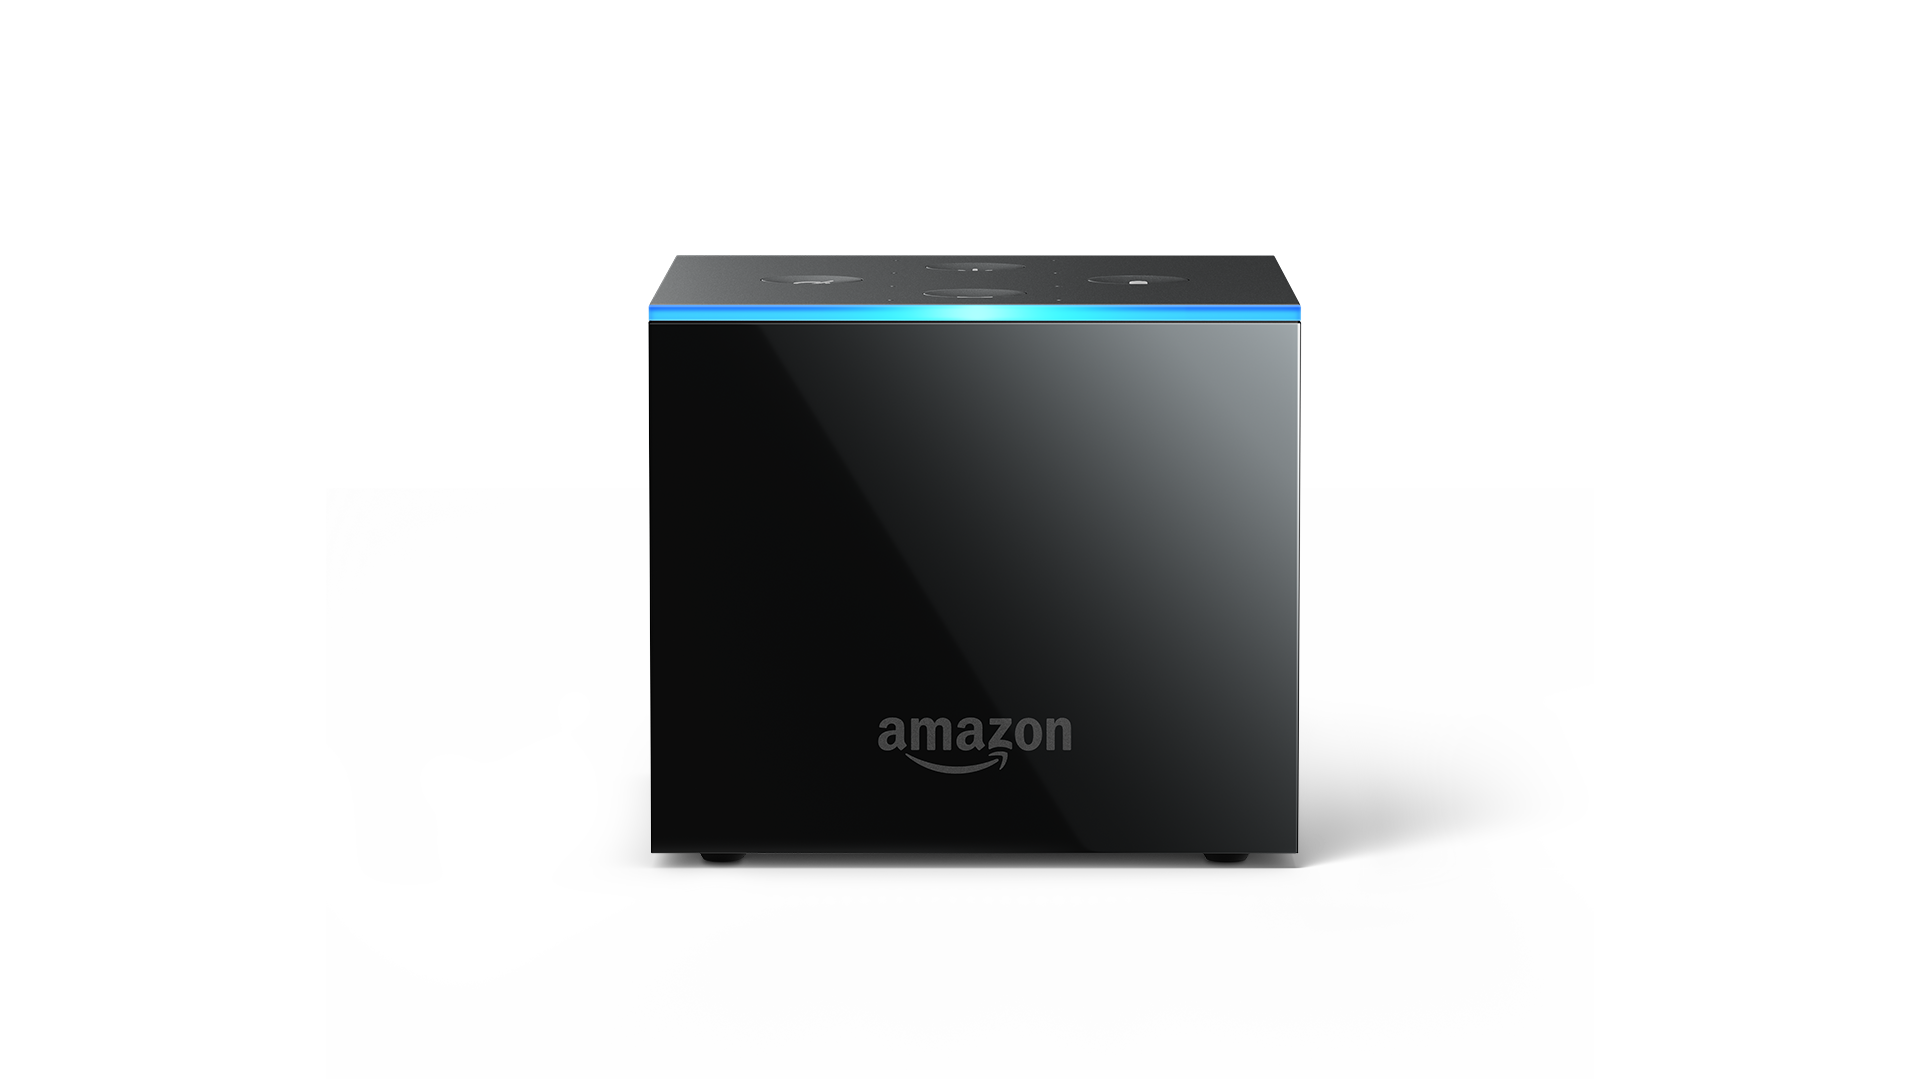 https://www.dolby.com/siteassets/xf-products/set-top-box/fire-tv-cube/amazon-fire-tv-cube.png